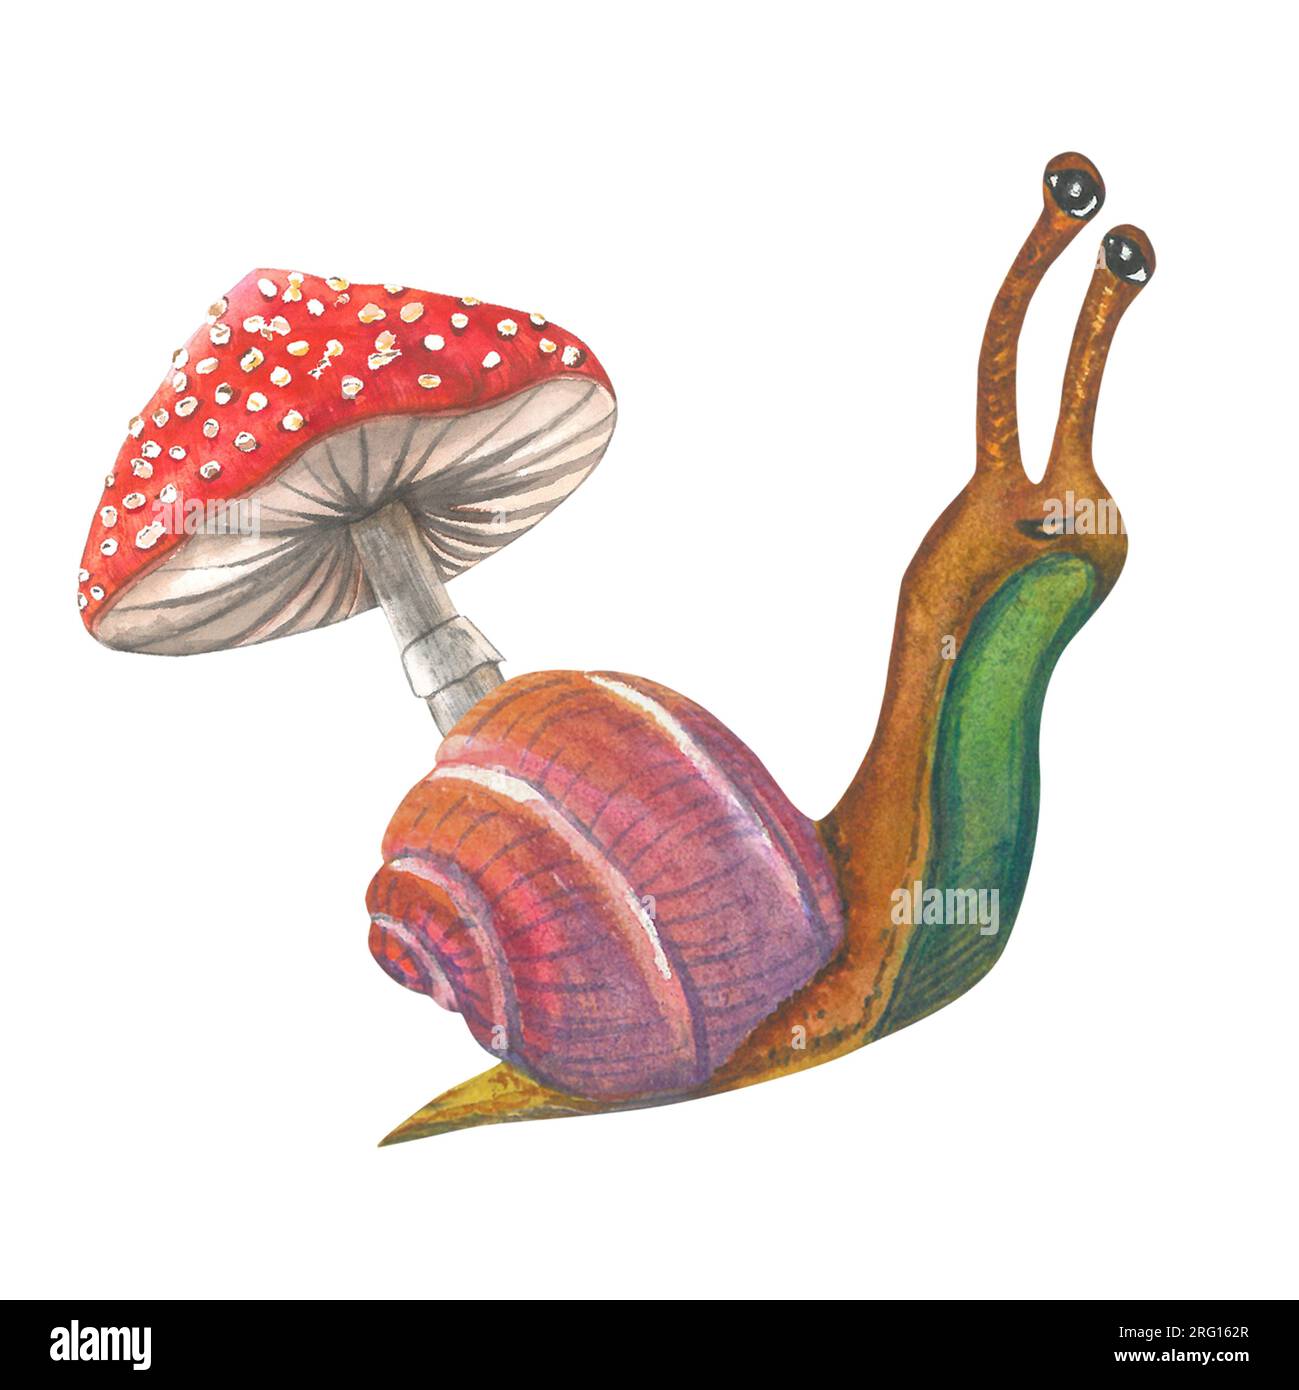 Watercolor illustration of snail and fly agaric. Composition made by hand isolated on white background Stock Photo